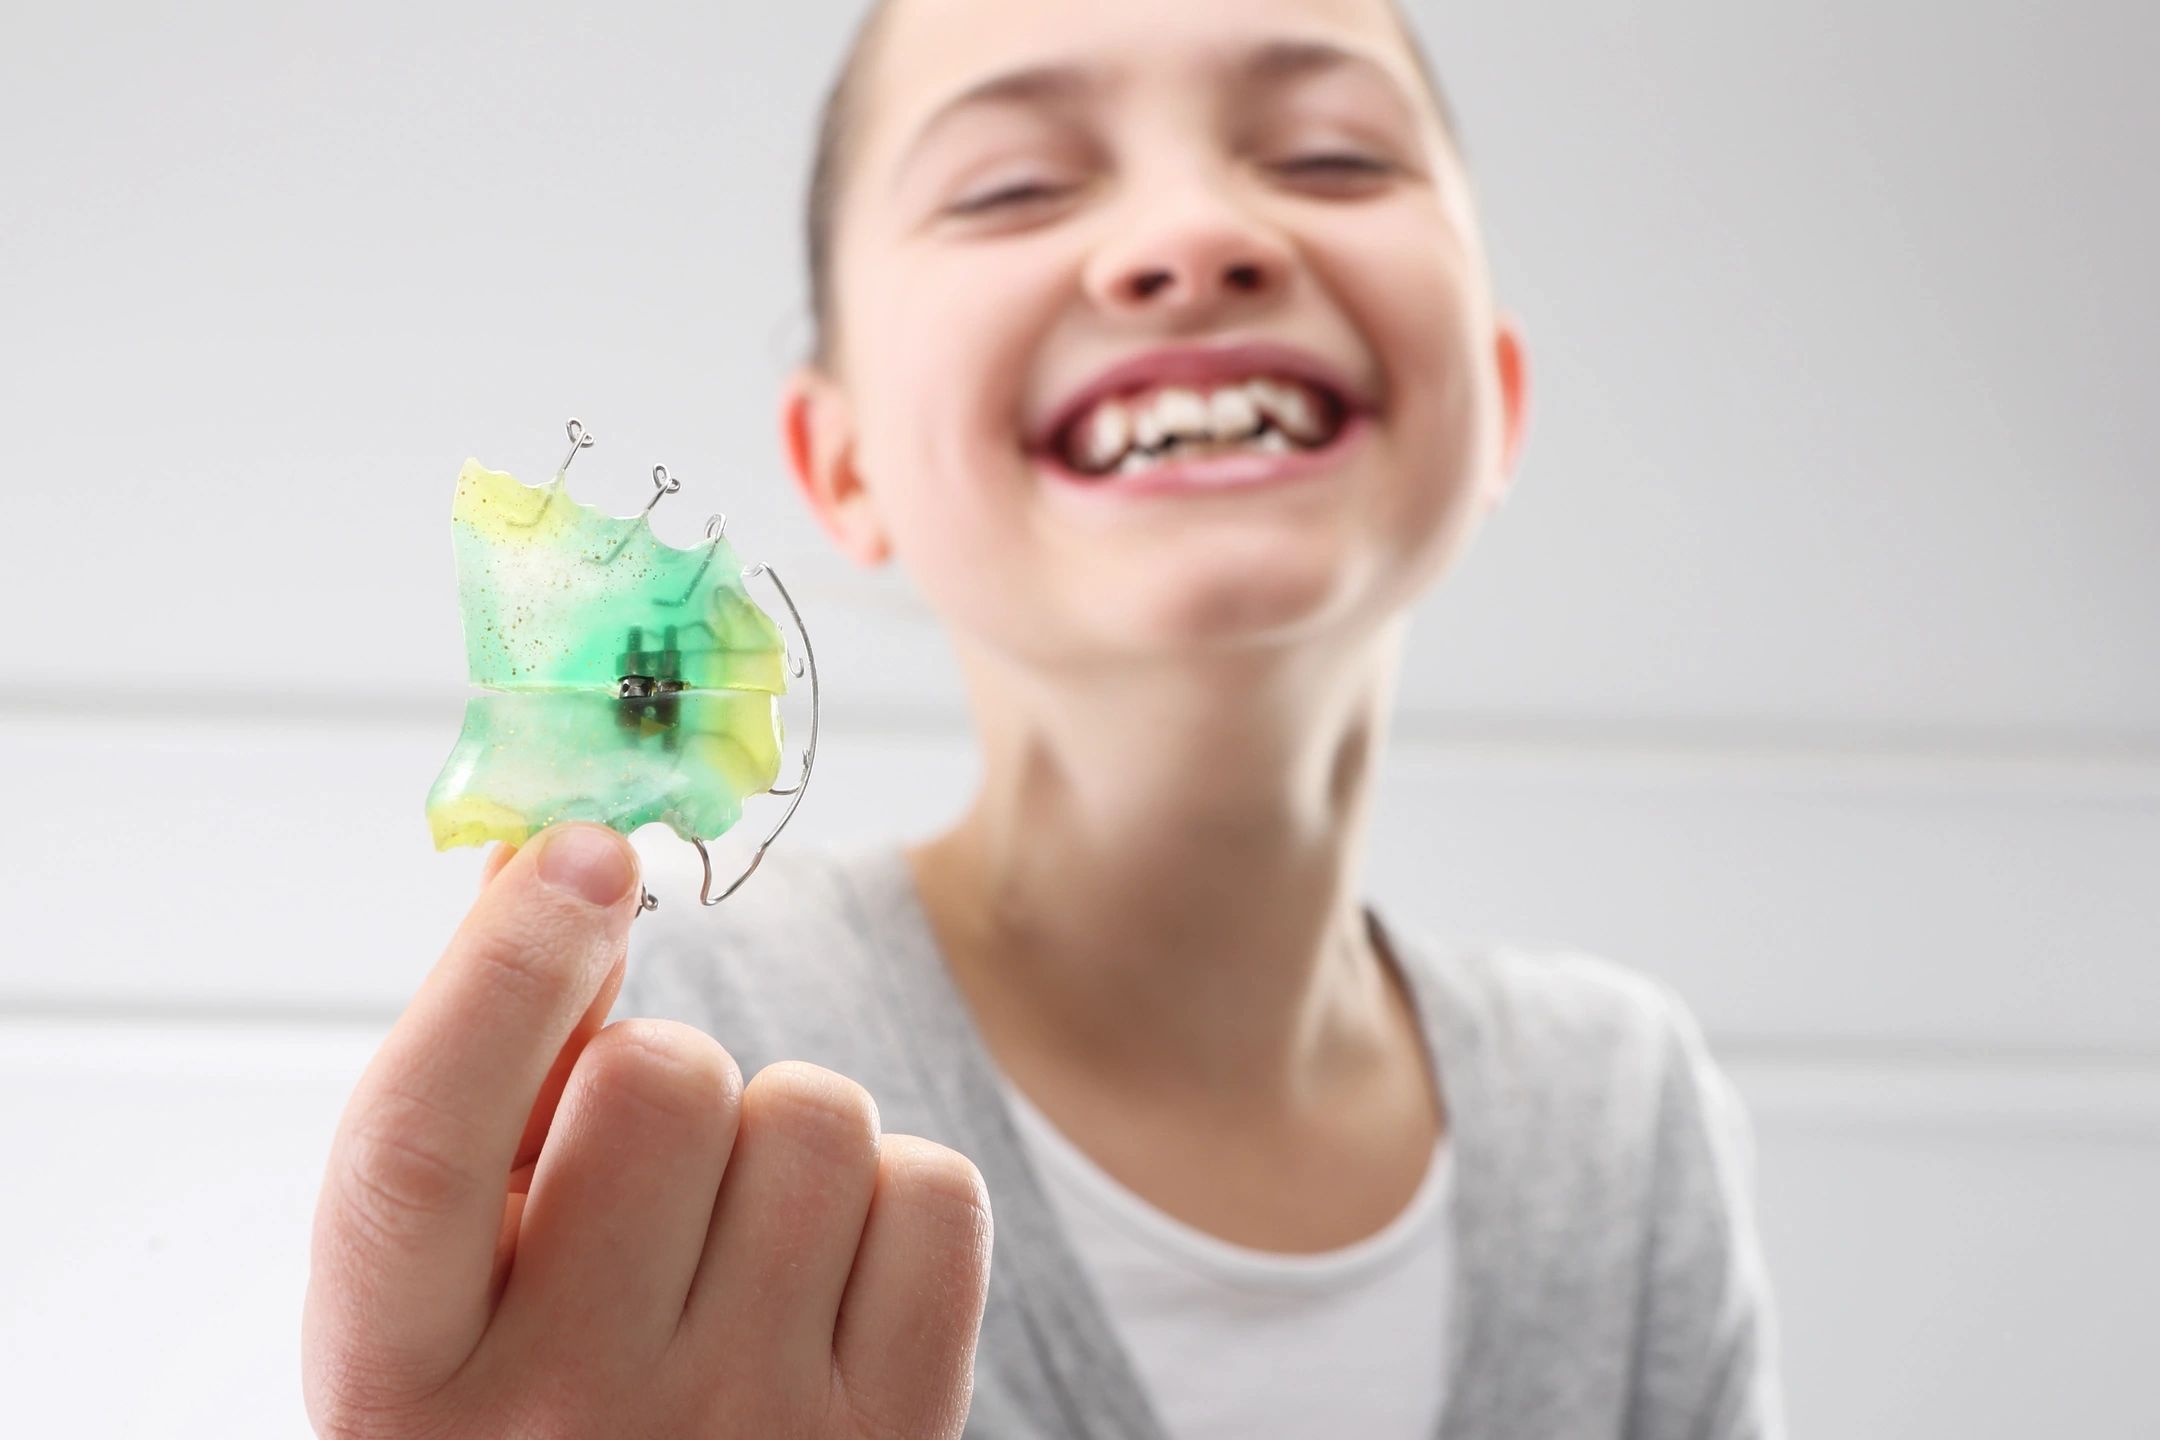 When should my child be seen by an orthodontist?